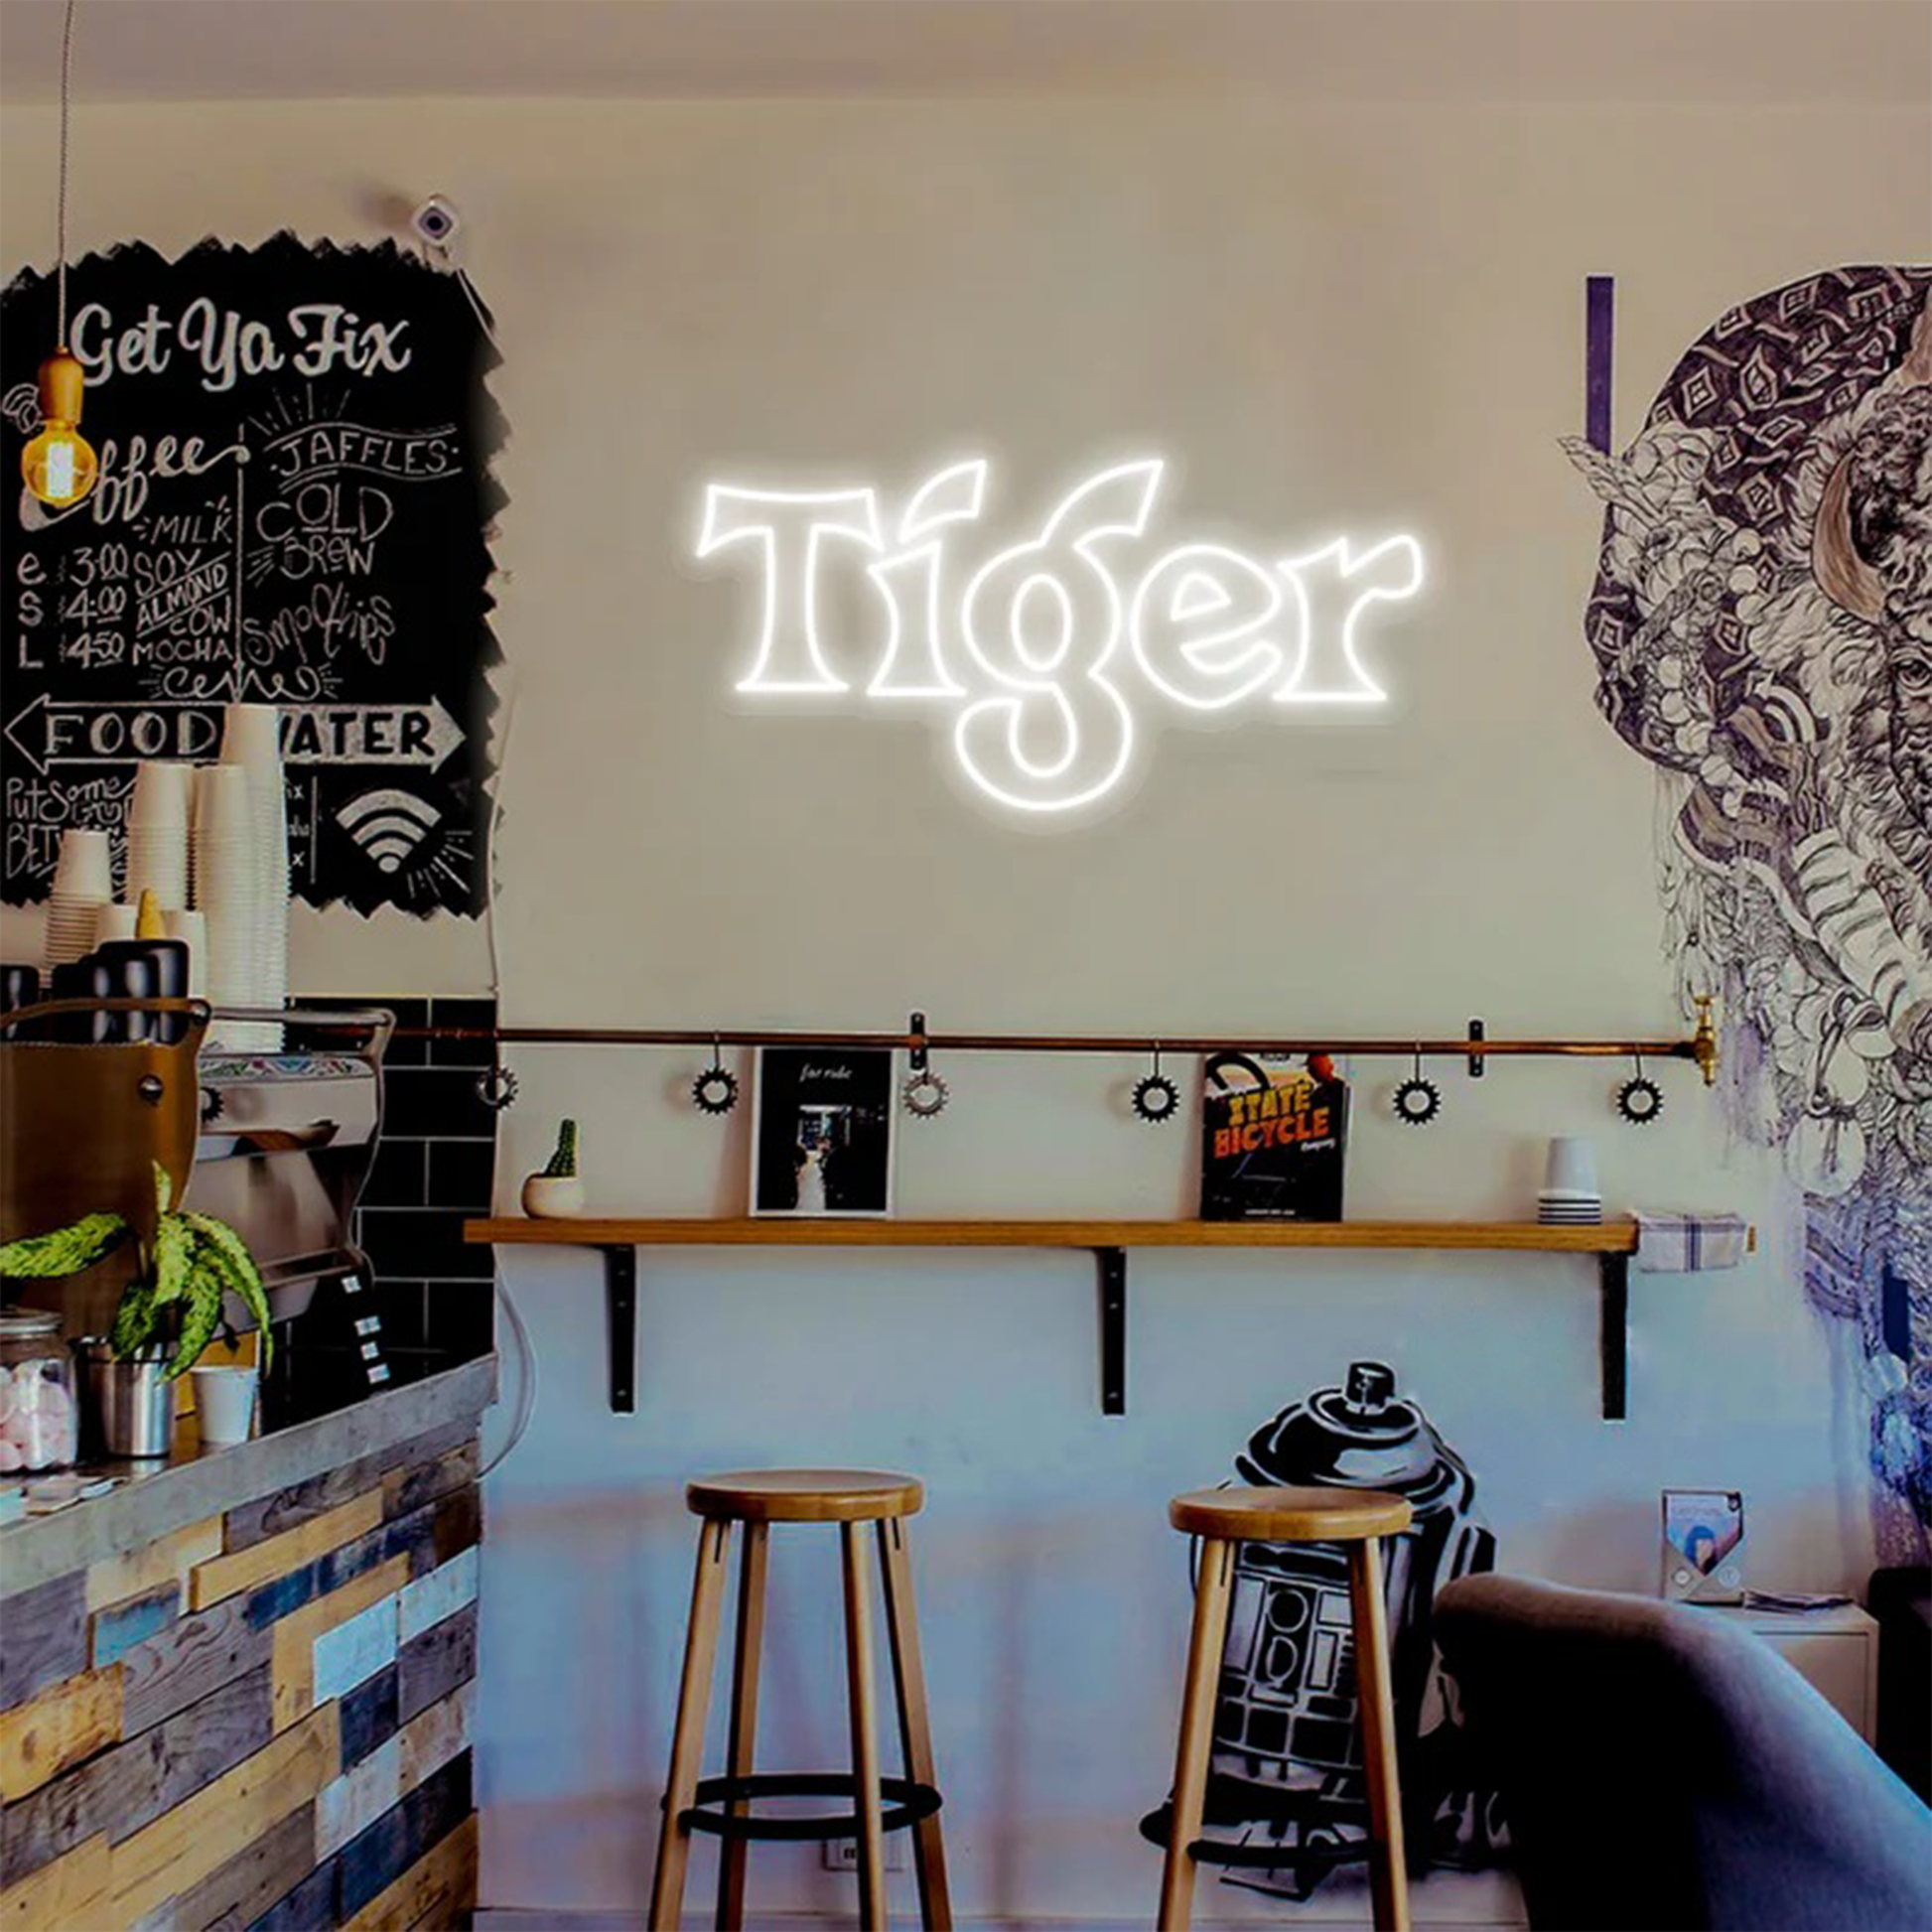 tiger-neon-sign-bar-wall-decor-home-pub-club-man-cave-party-decor-led-lights-store-shop-signage-business-sign